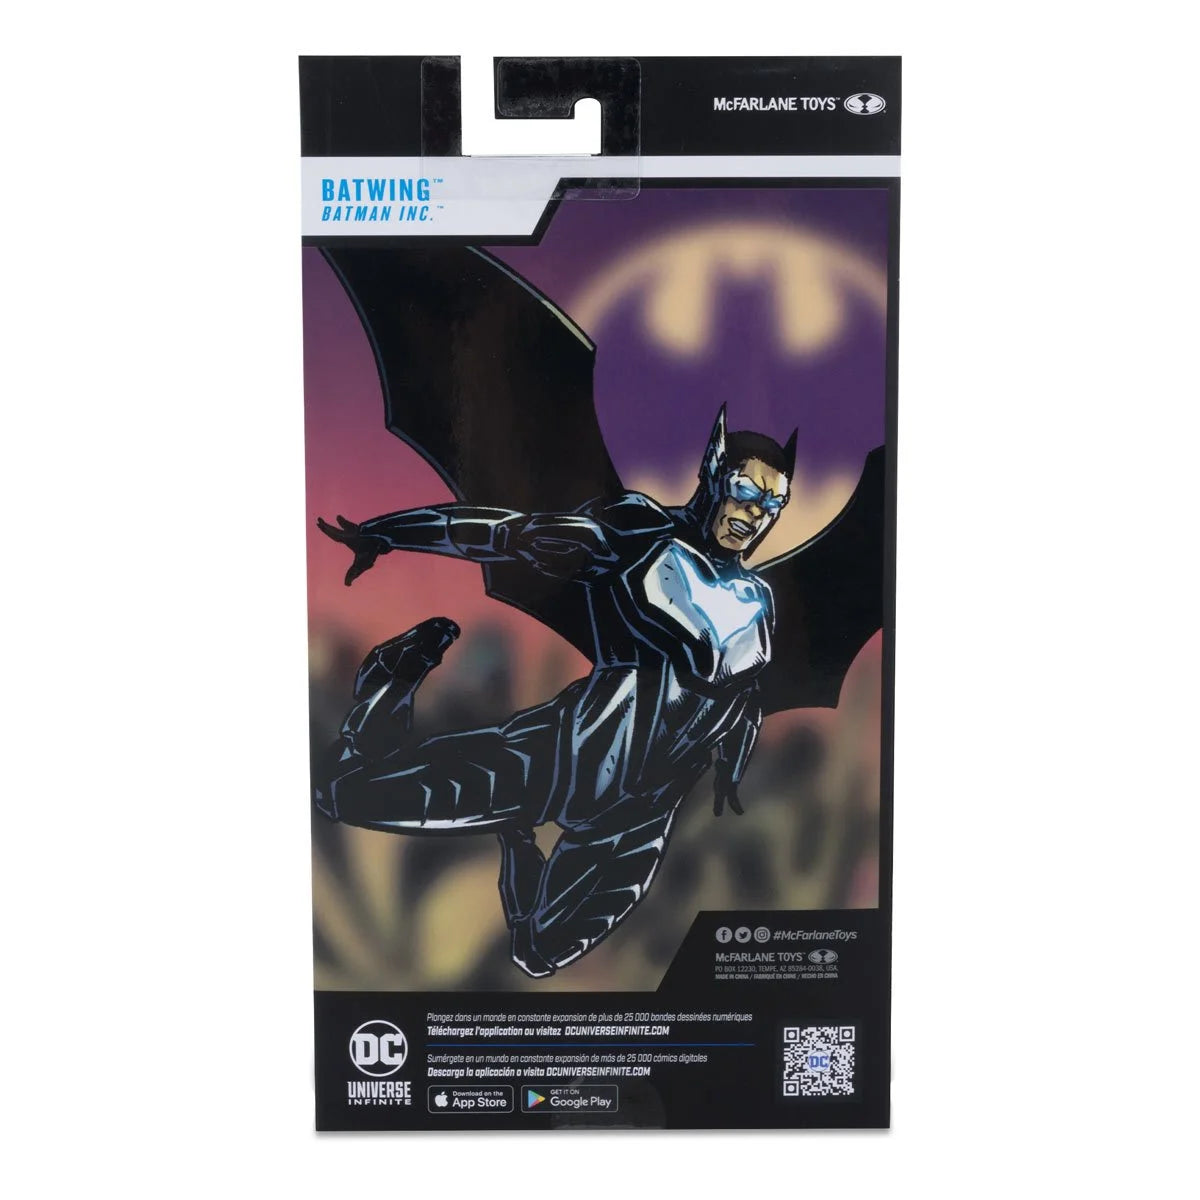 DC Multiverse Batwing New 52 7-Inch Scale Action Figure back view of the box - heretoserveyou